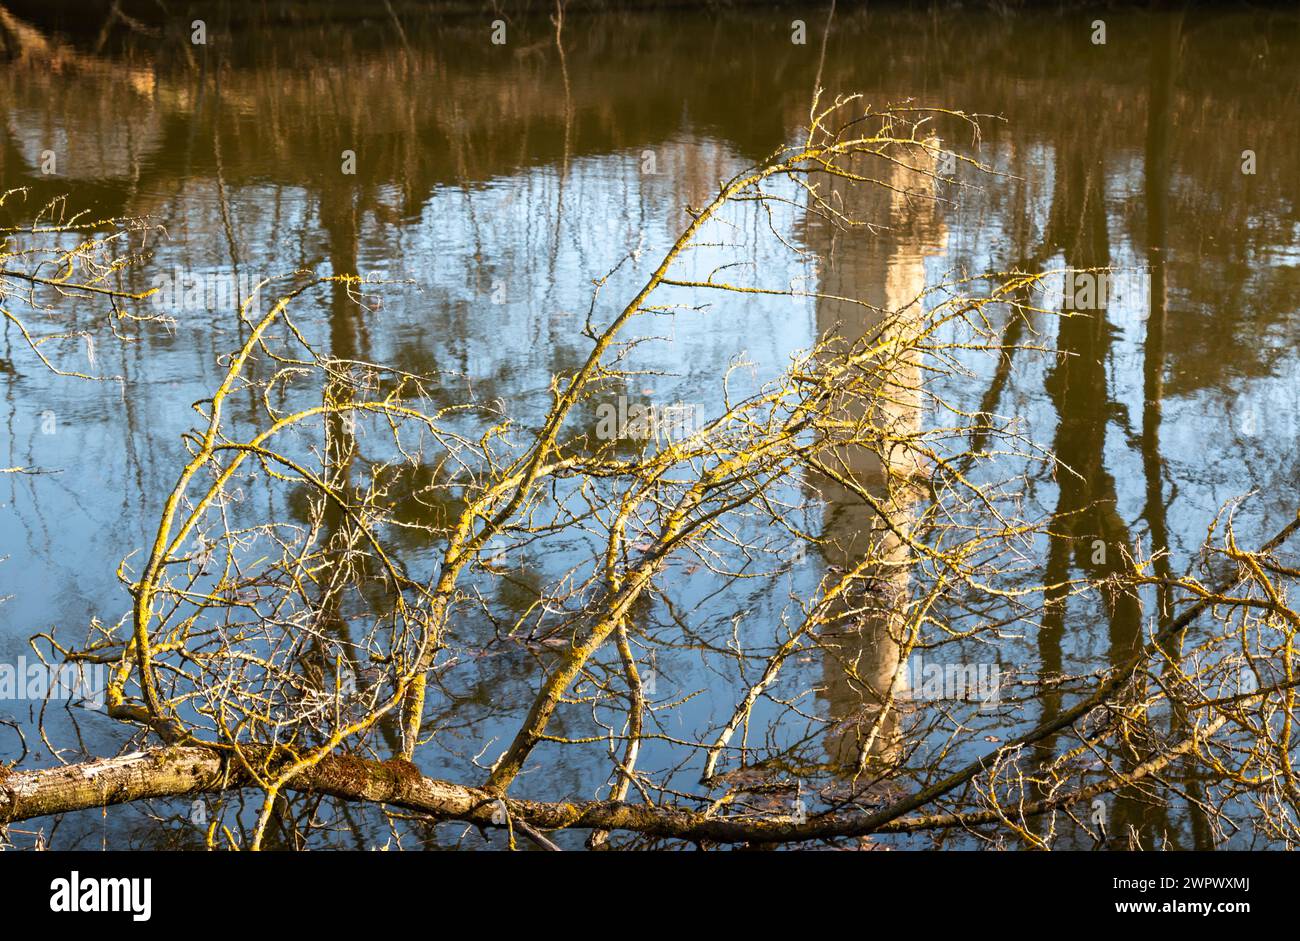 Sunny day in the late winter. Partly broken twigs in the river Dyje, reflecting a tower - minaret in a park. Lednice, Podivin, Morava, Czechia. Stock Photo